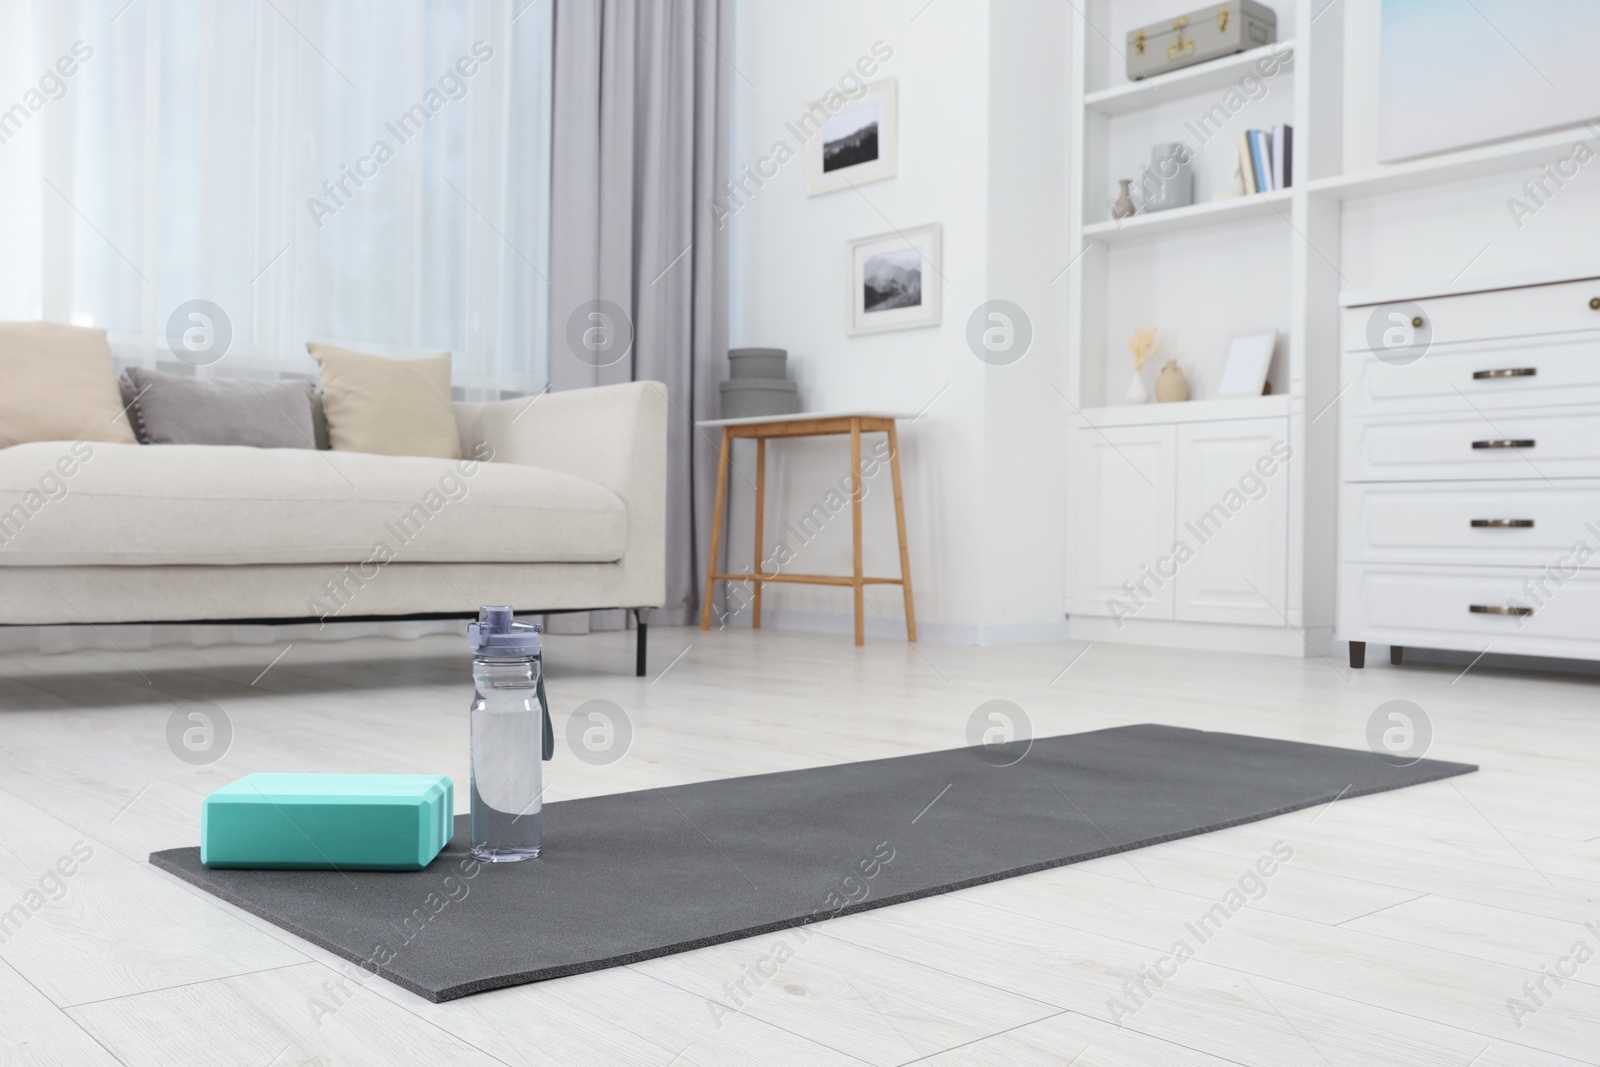 Photo of Exercise mat, yoga block and bottle of water on floor in room